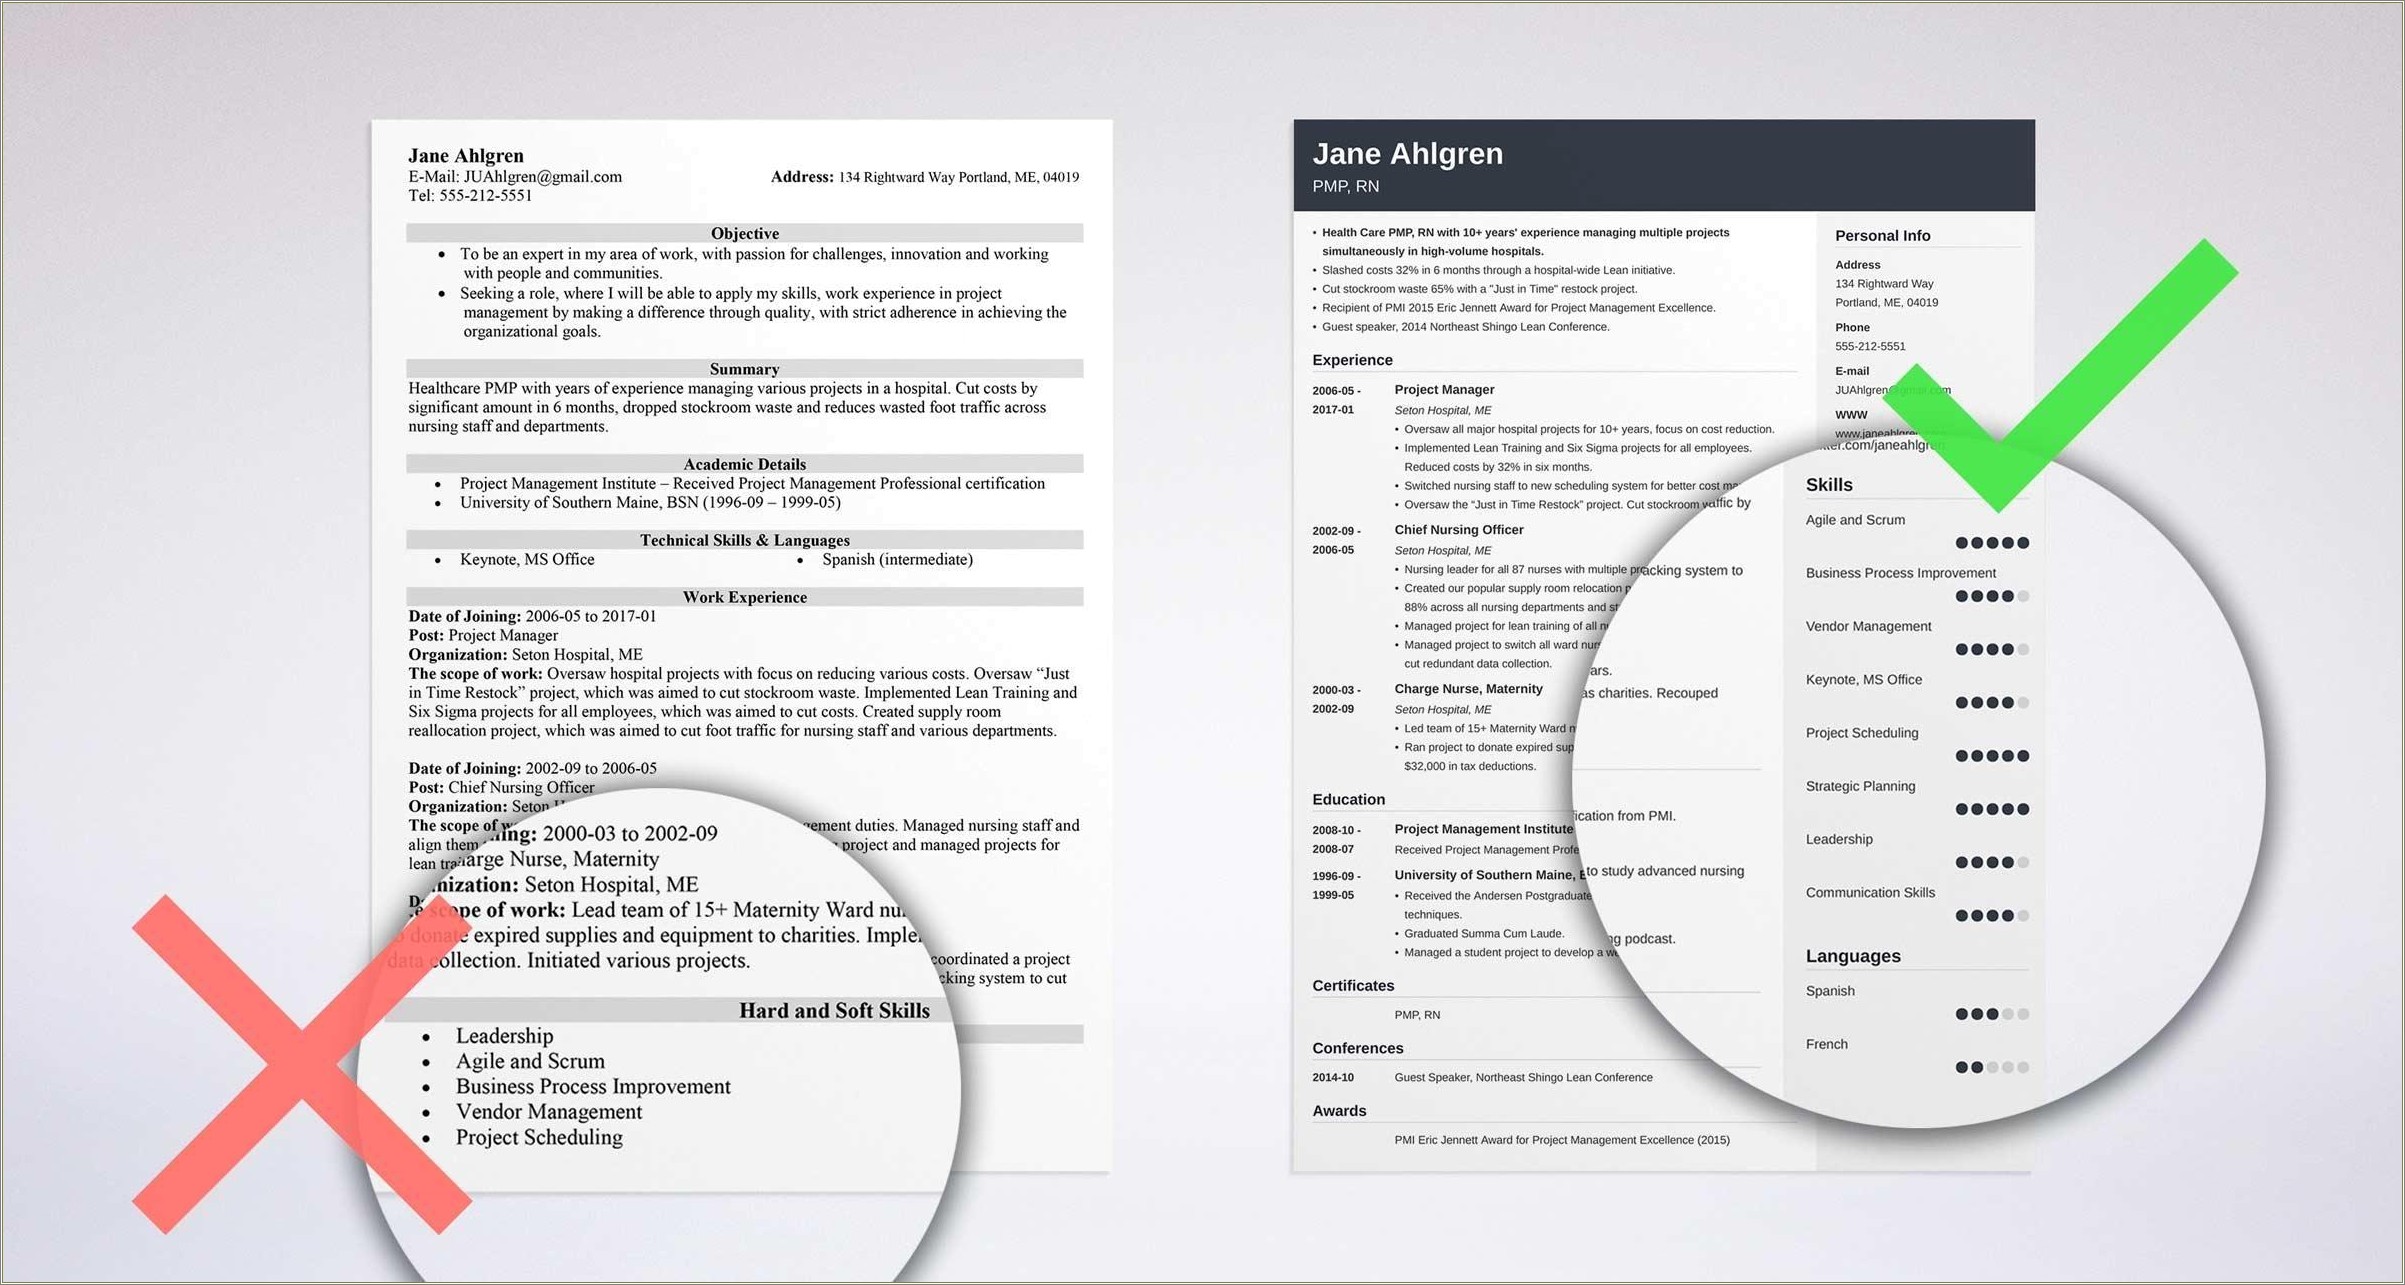 Hard Skills To Have On A Resume